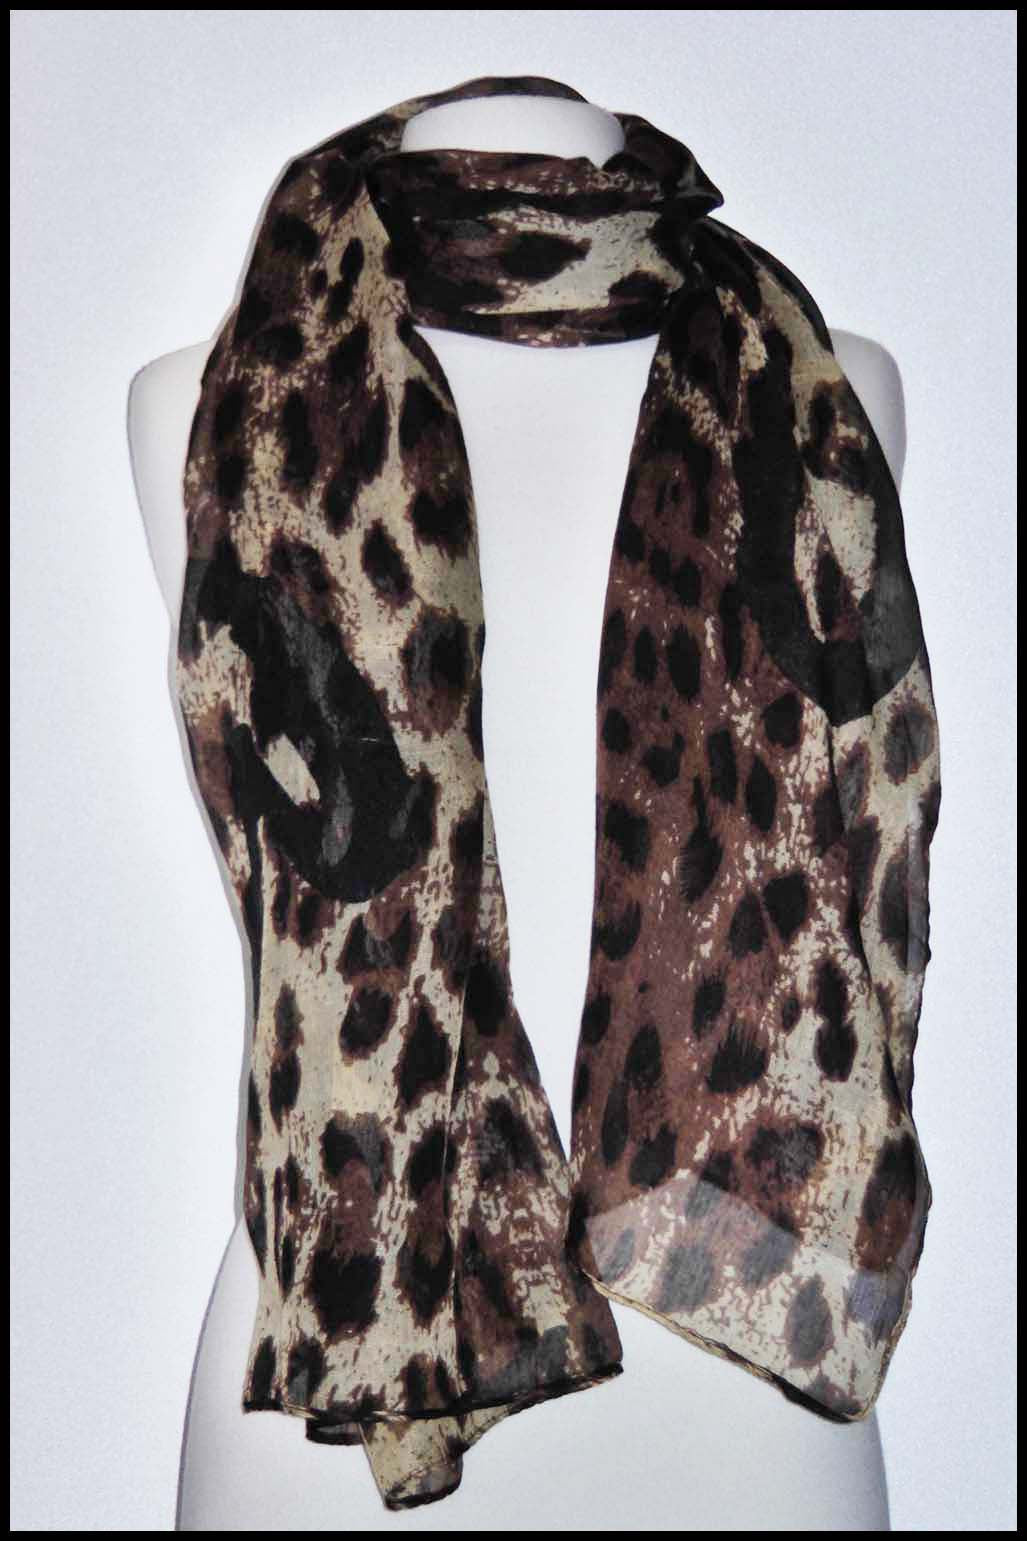 Soft Leopard Print Scarf with Heart Design